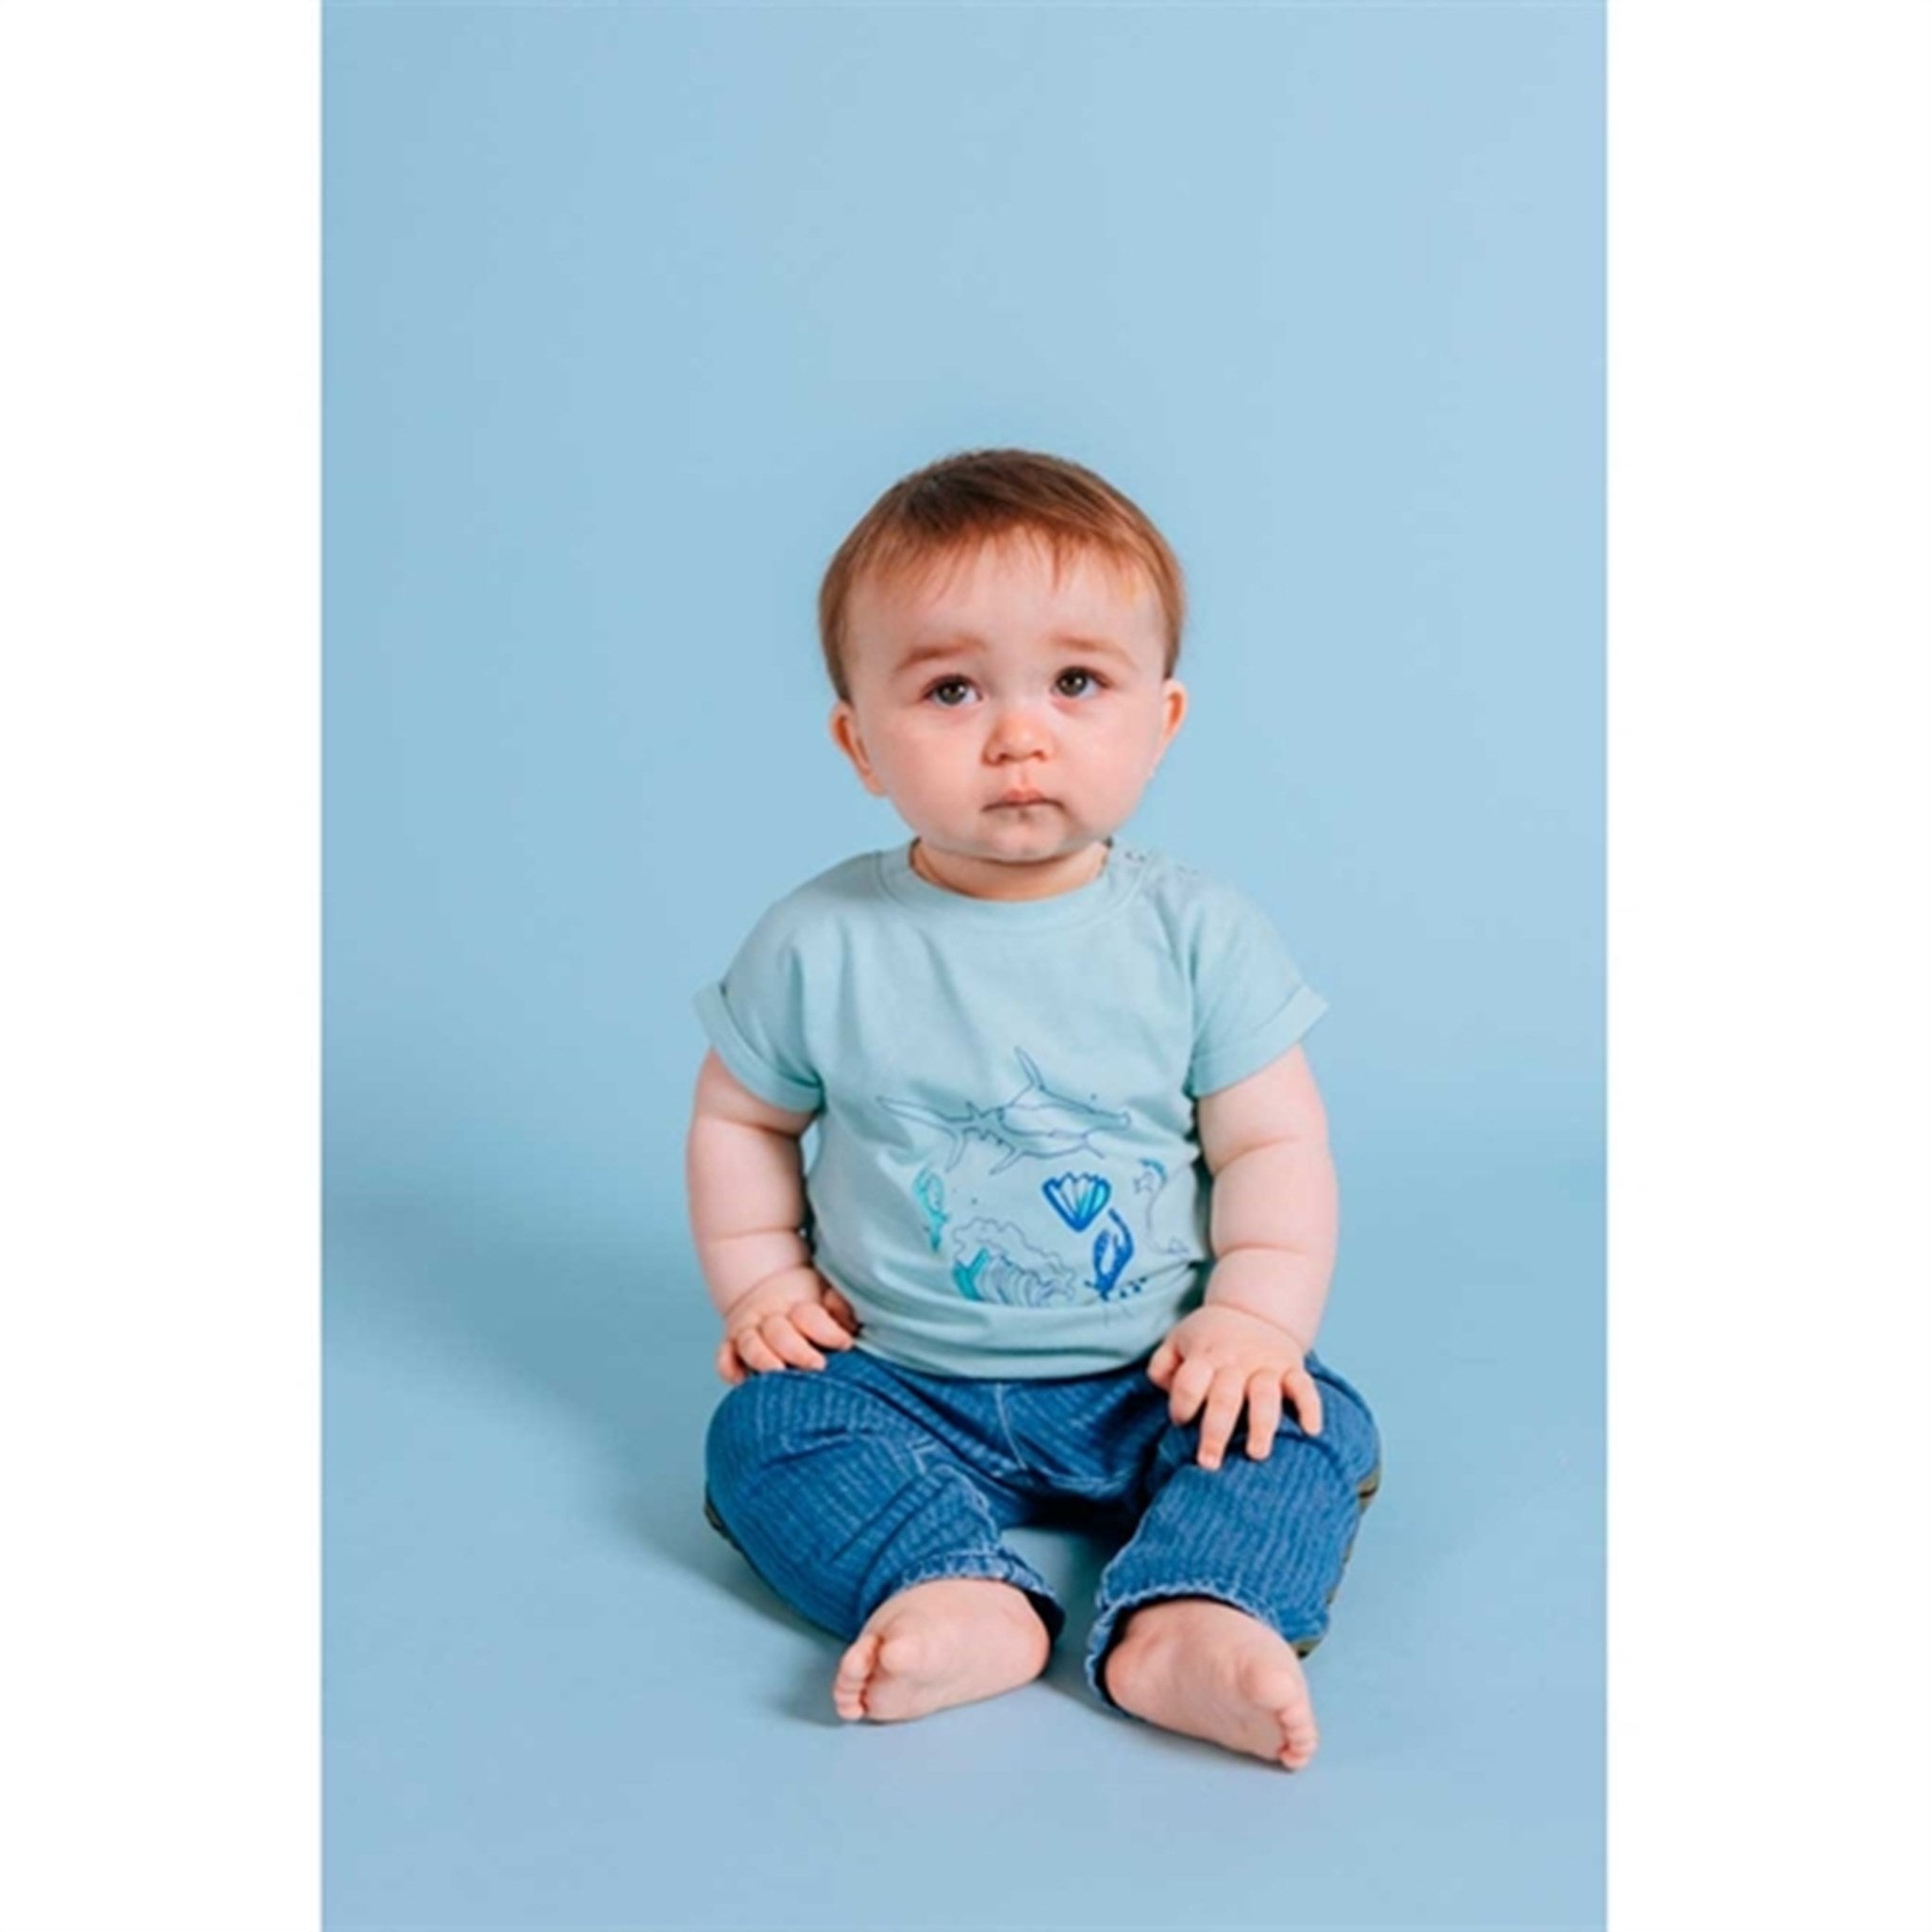 Soft Gallery Canal Blue Frederick Sealife T-shirt 2